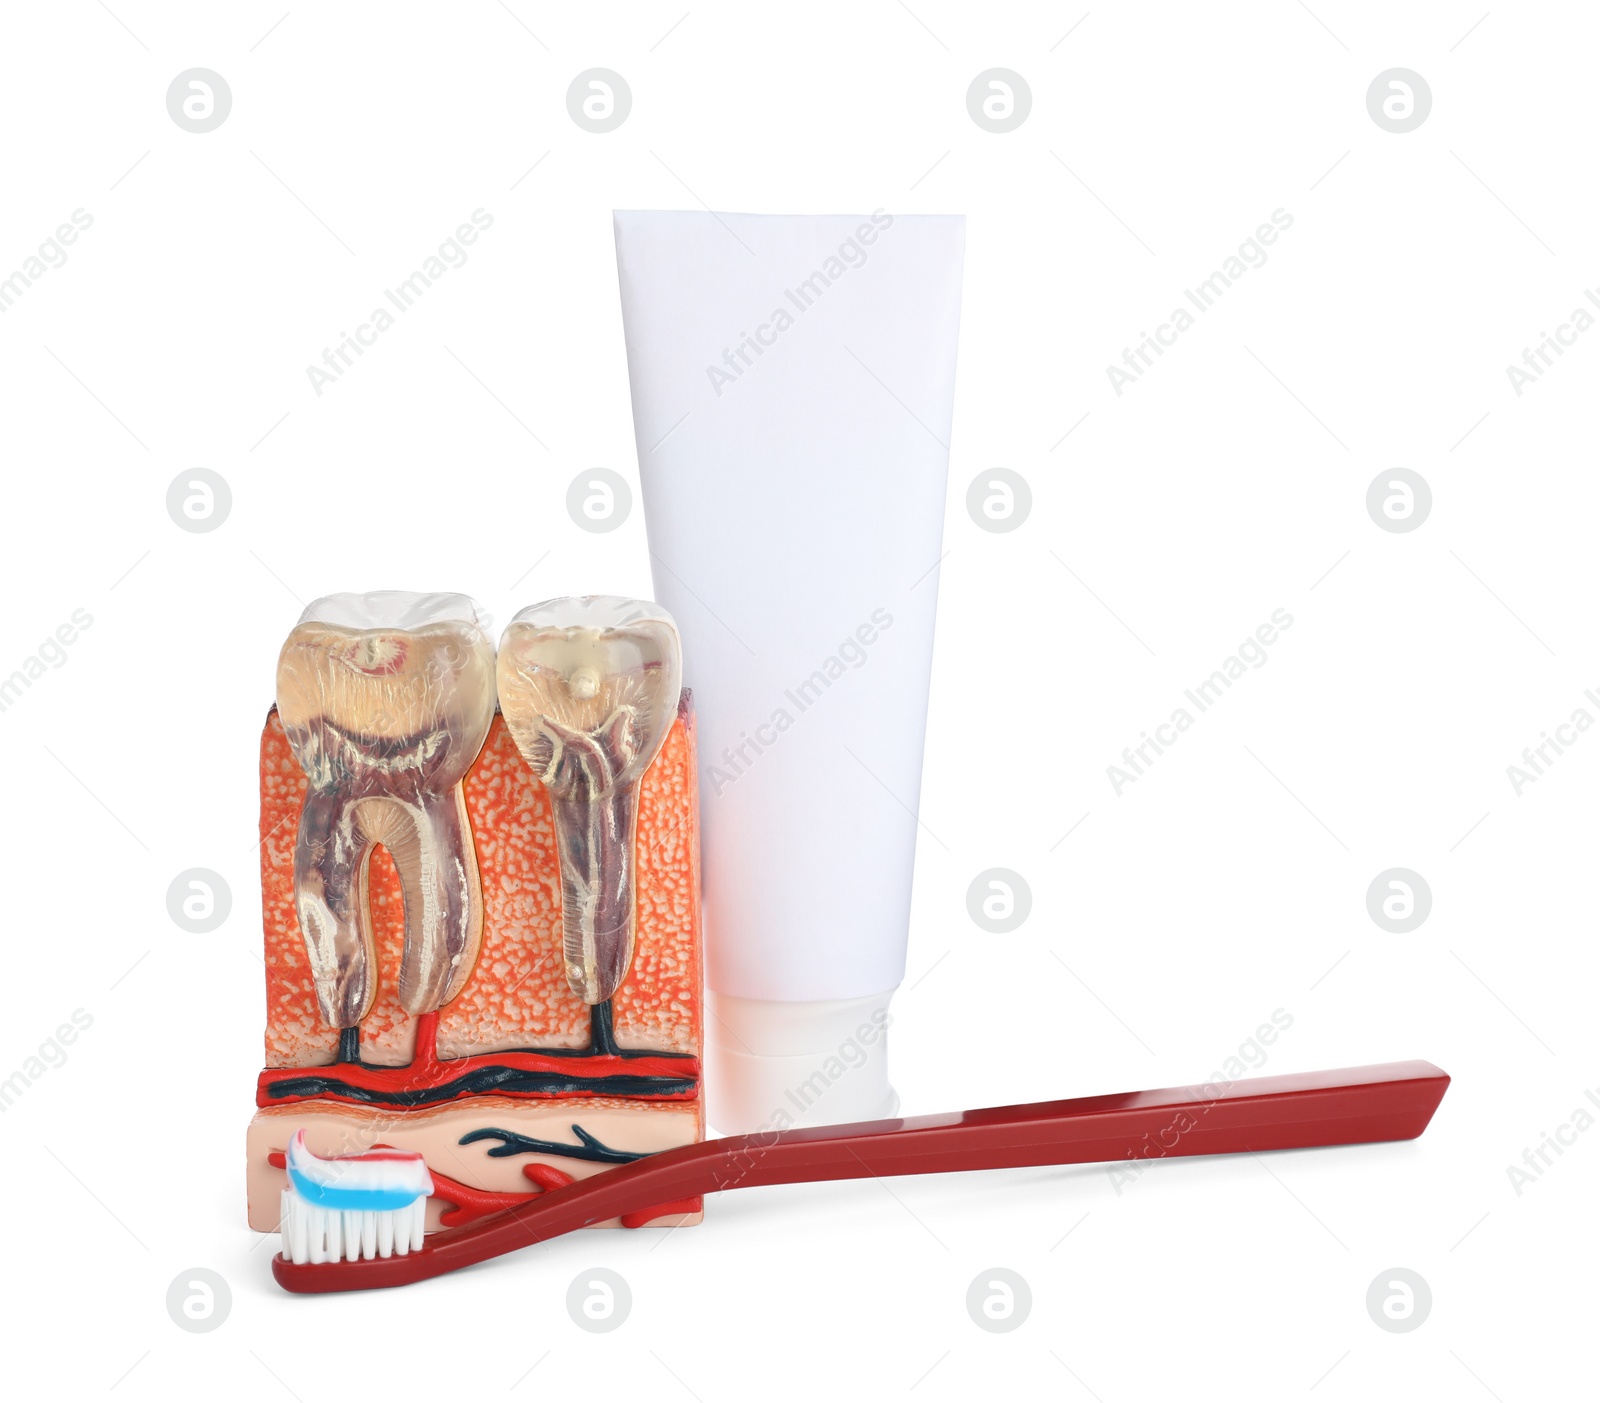 Photo of Educational model of jaw section with teeth, paste and brush on white background